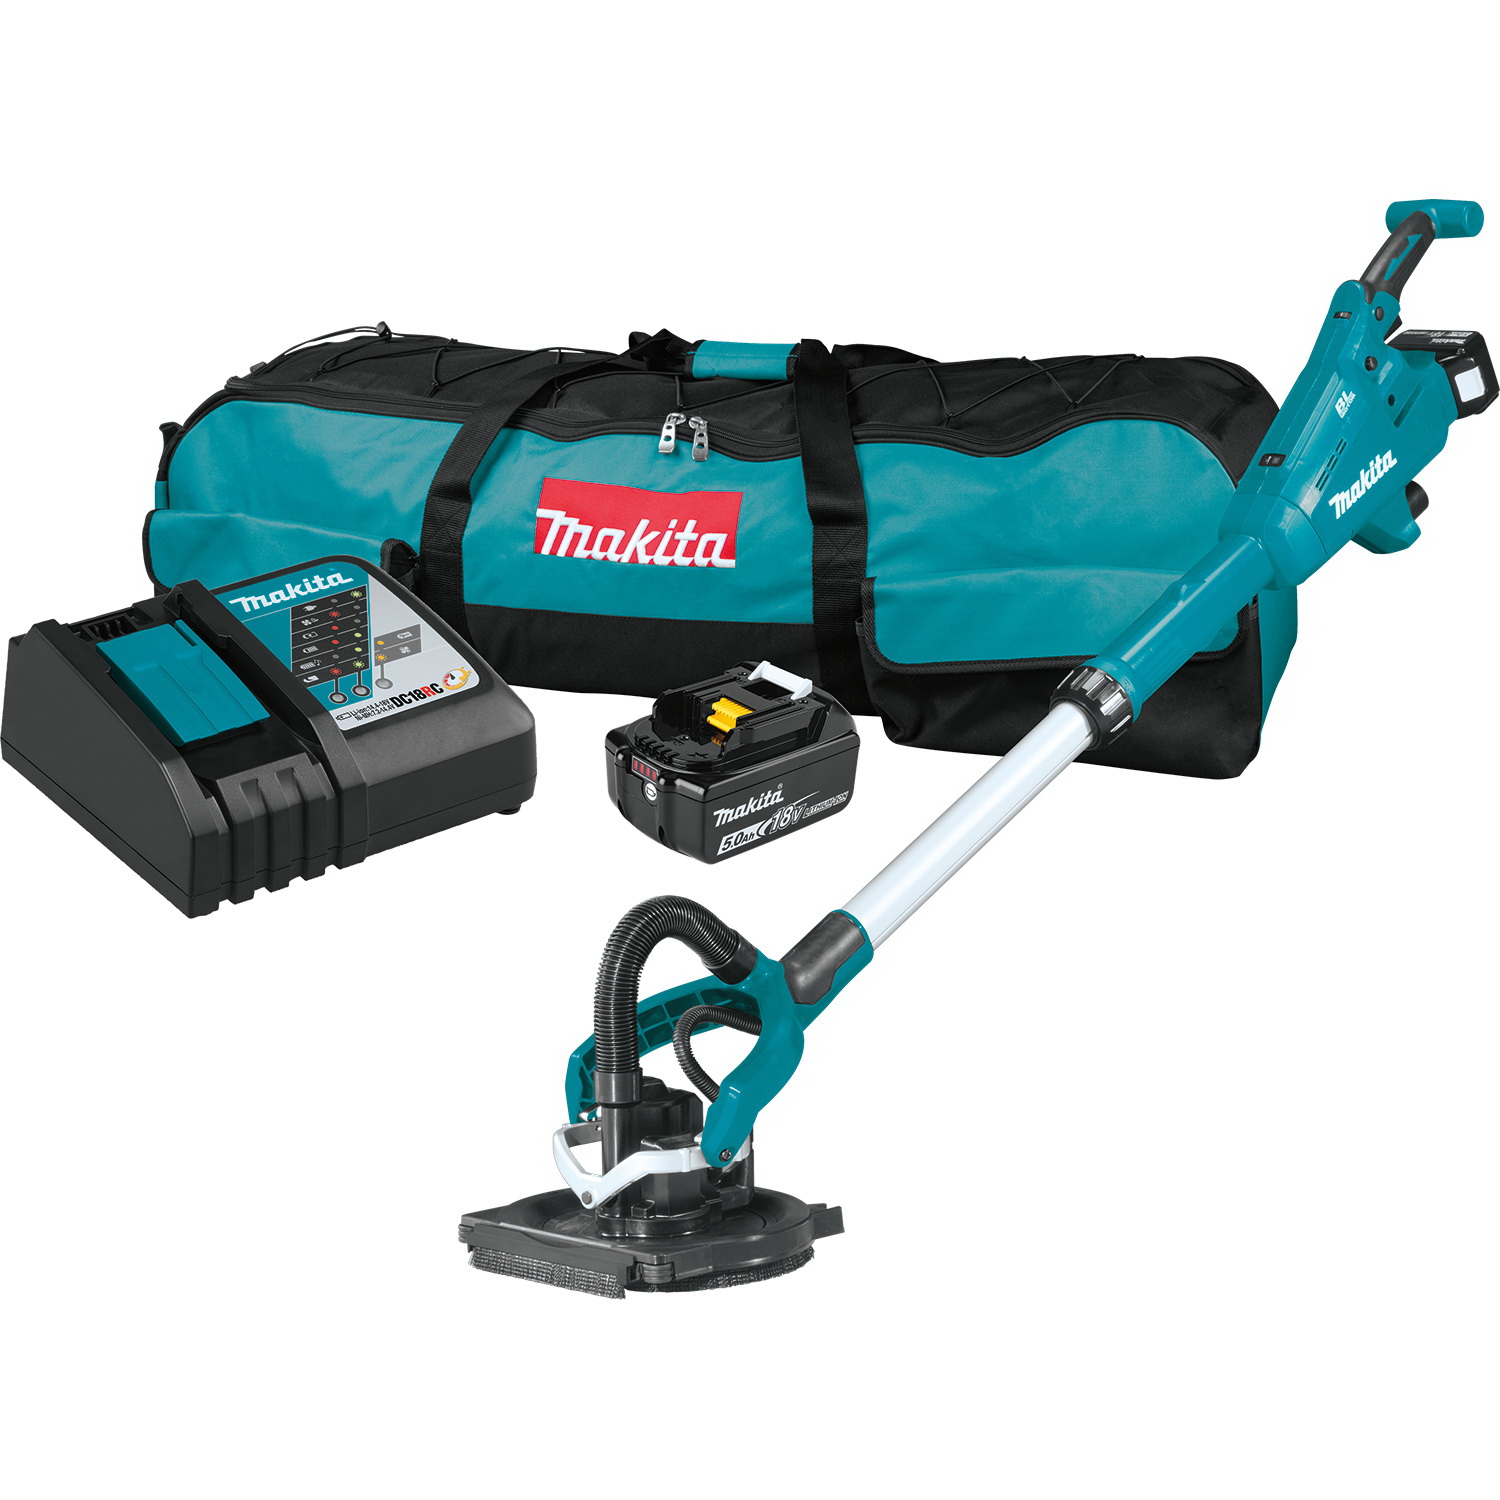 Makita LXT Series XLS01T Drywall Sander Kit, Battery, 18 V, 8-1/4 in Pad/Disc, 1000 to 1800 rpm No Load